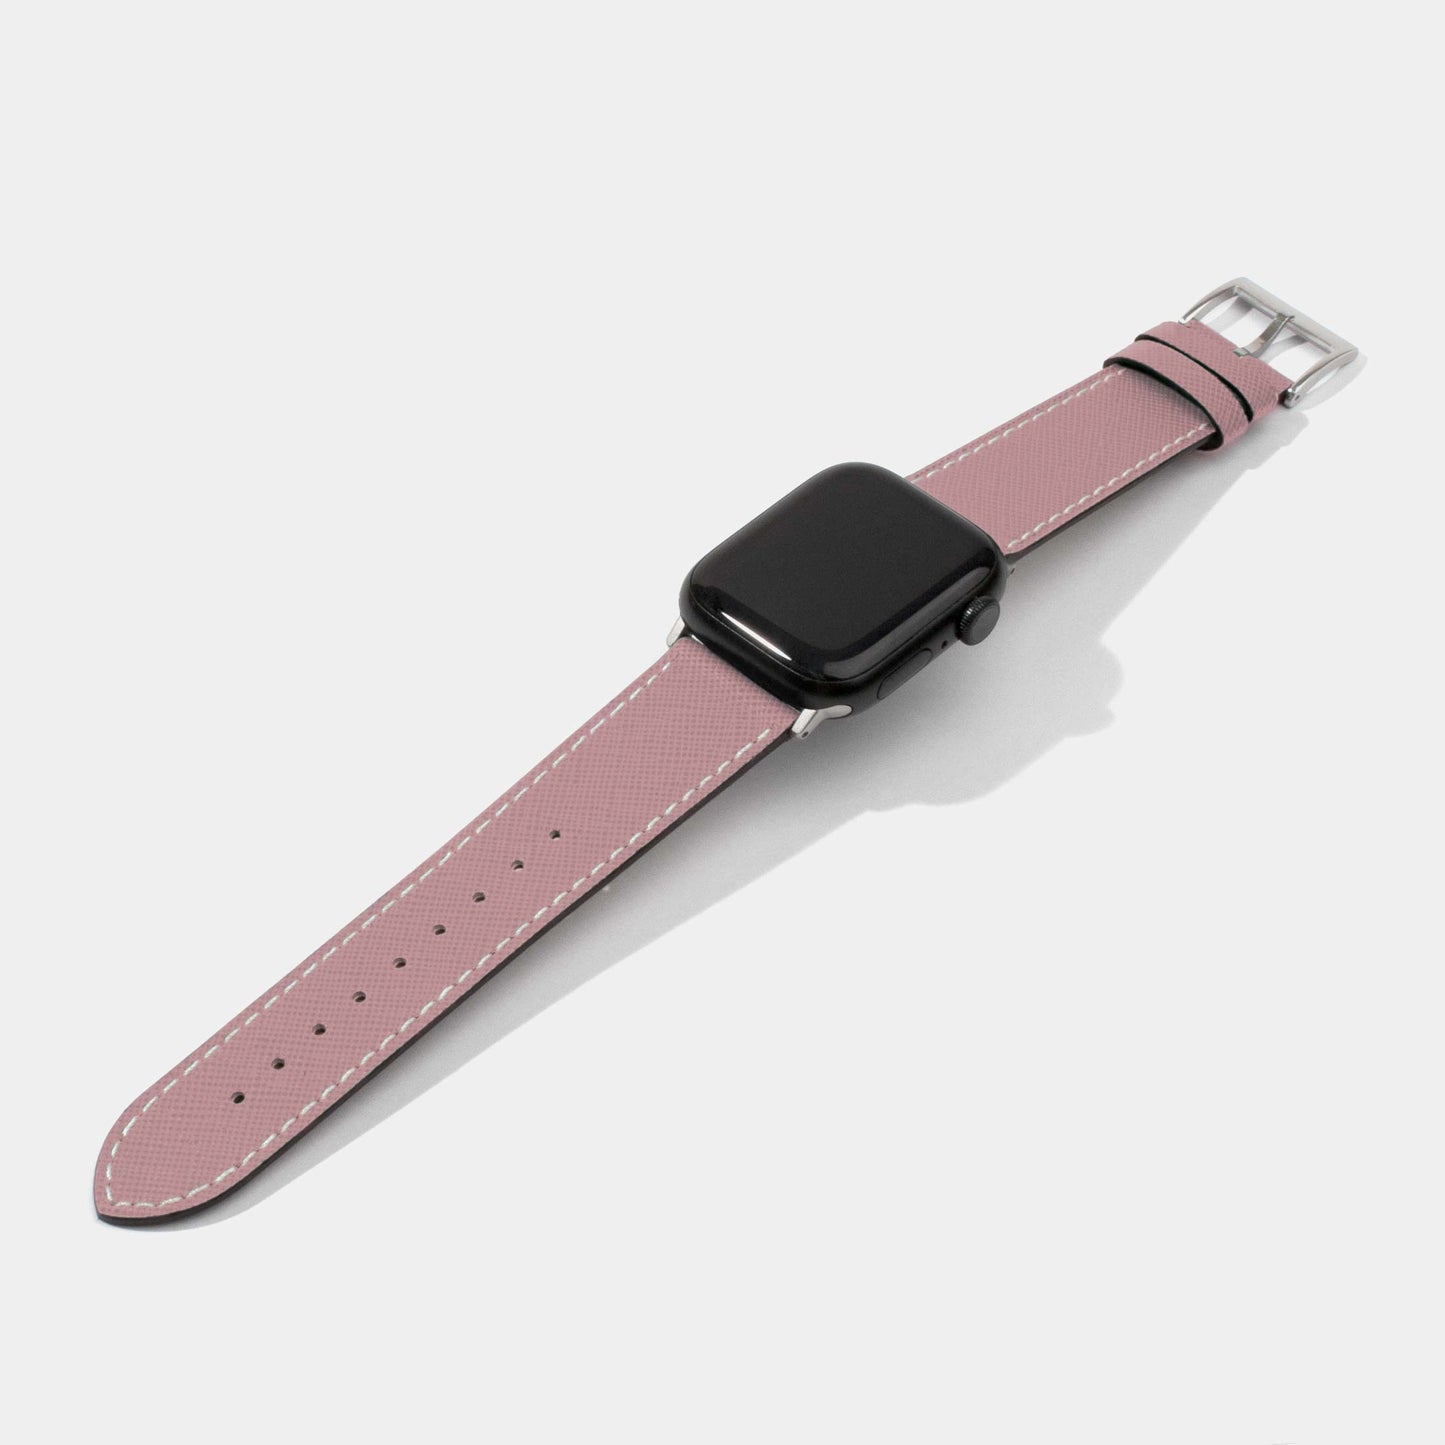 Saffiano Calf Leather Replacement Strap | Apple Watch Strap | Purple Pink